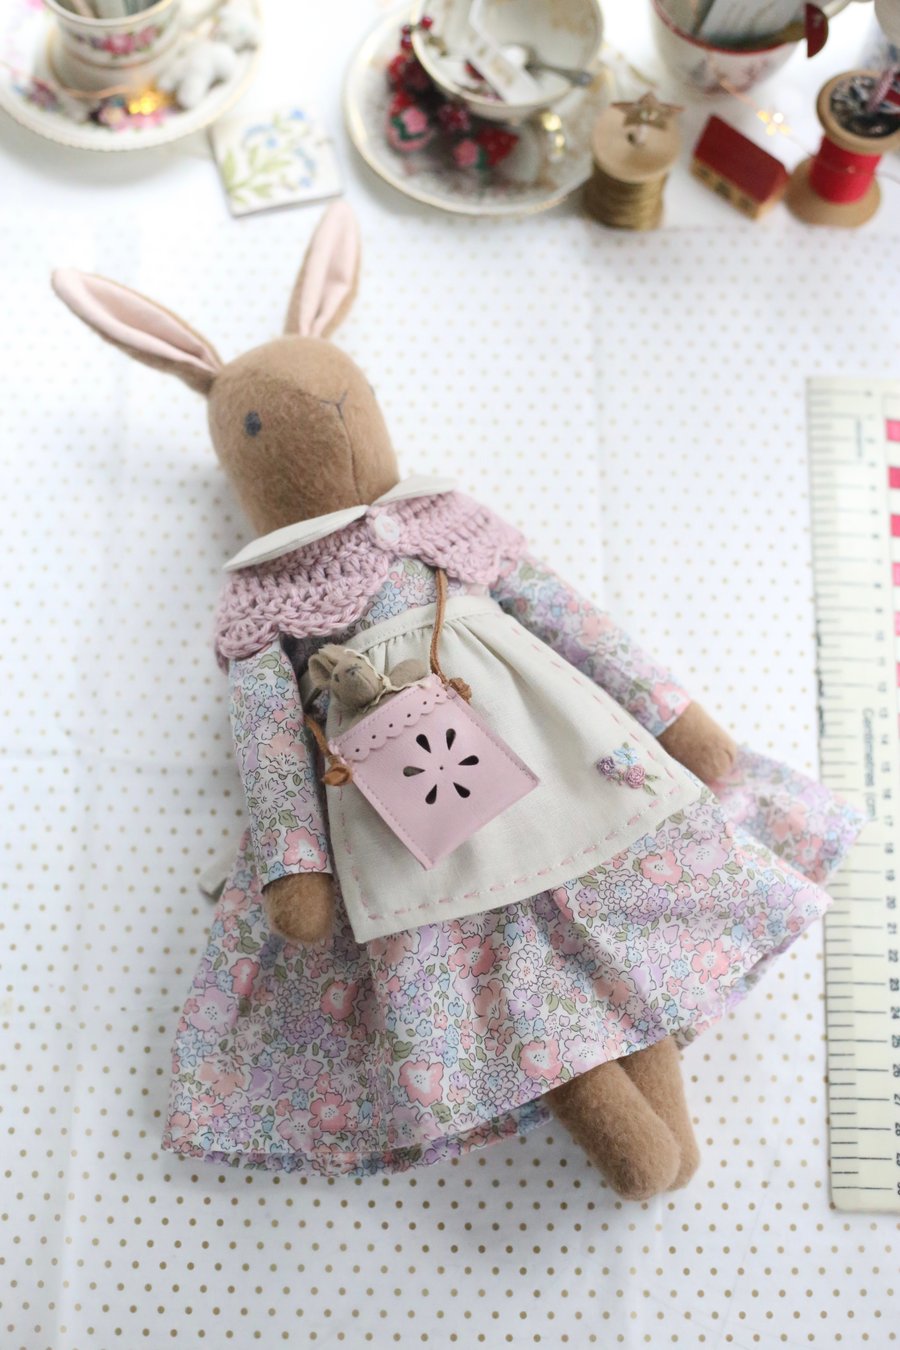 Reserved listing for Sarah S - Heirloom Liberty bunny Michelle